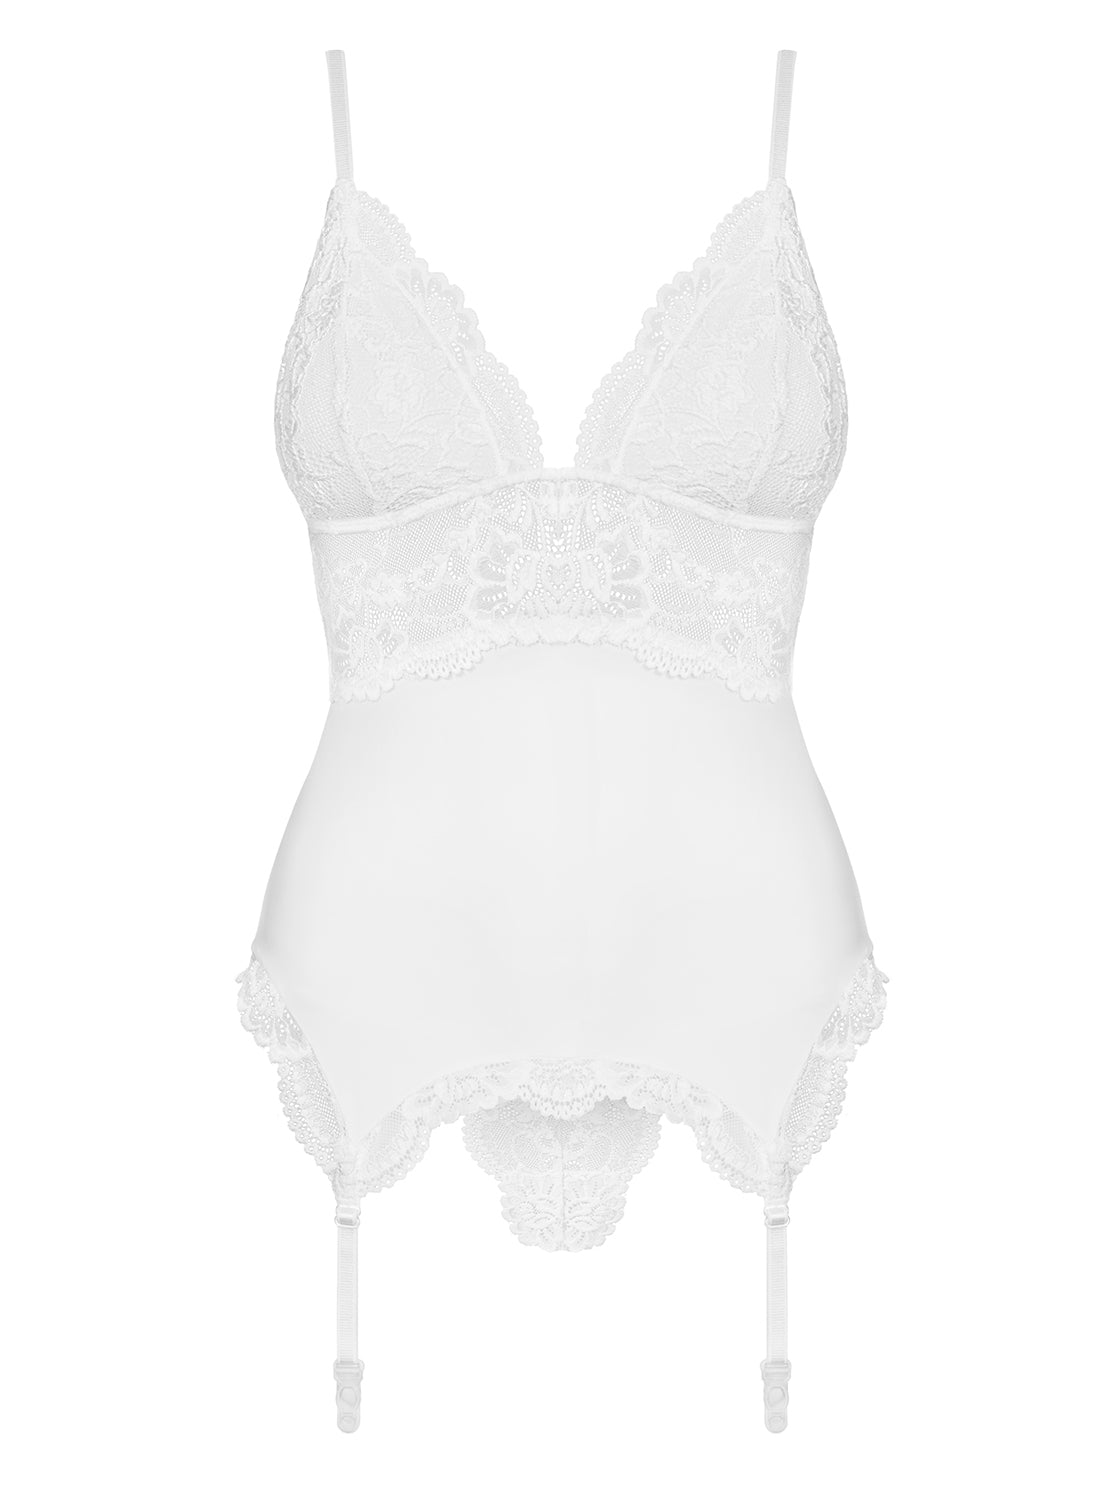 White corset with floral lace